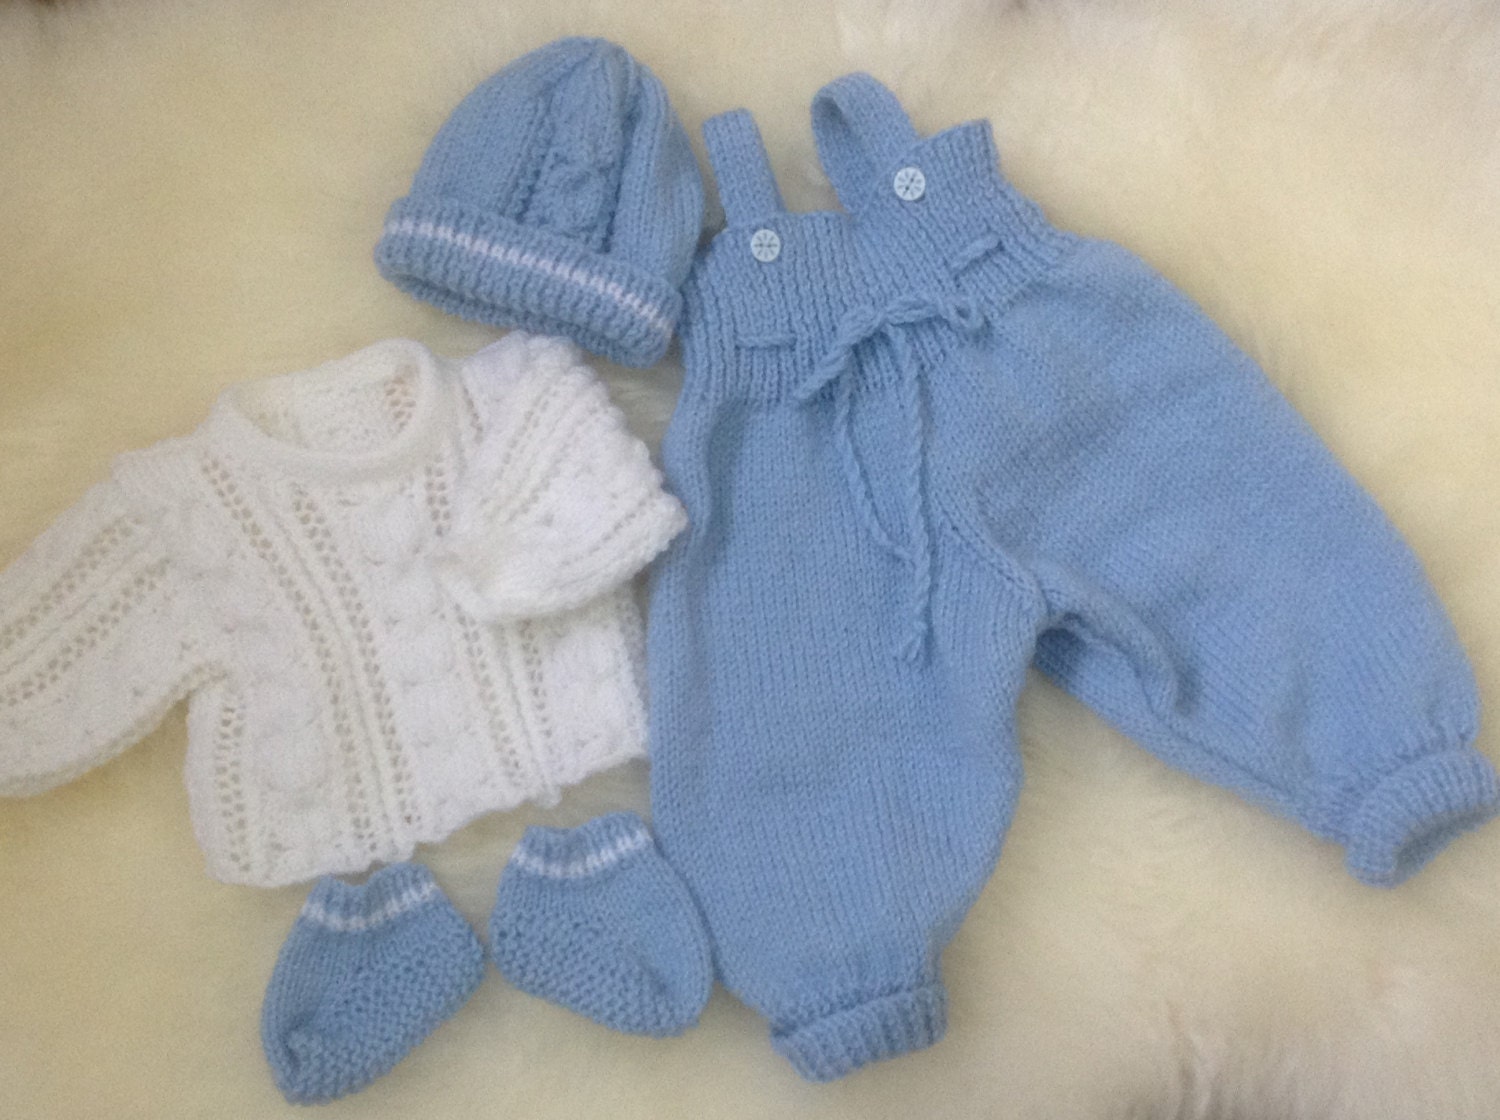 Newborn Coming Home Overalls Outfit or will by Meganknits4charity